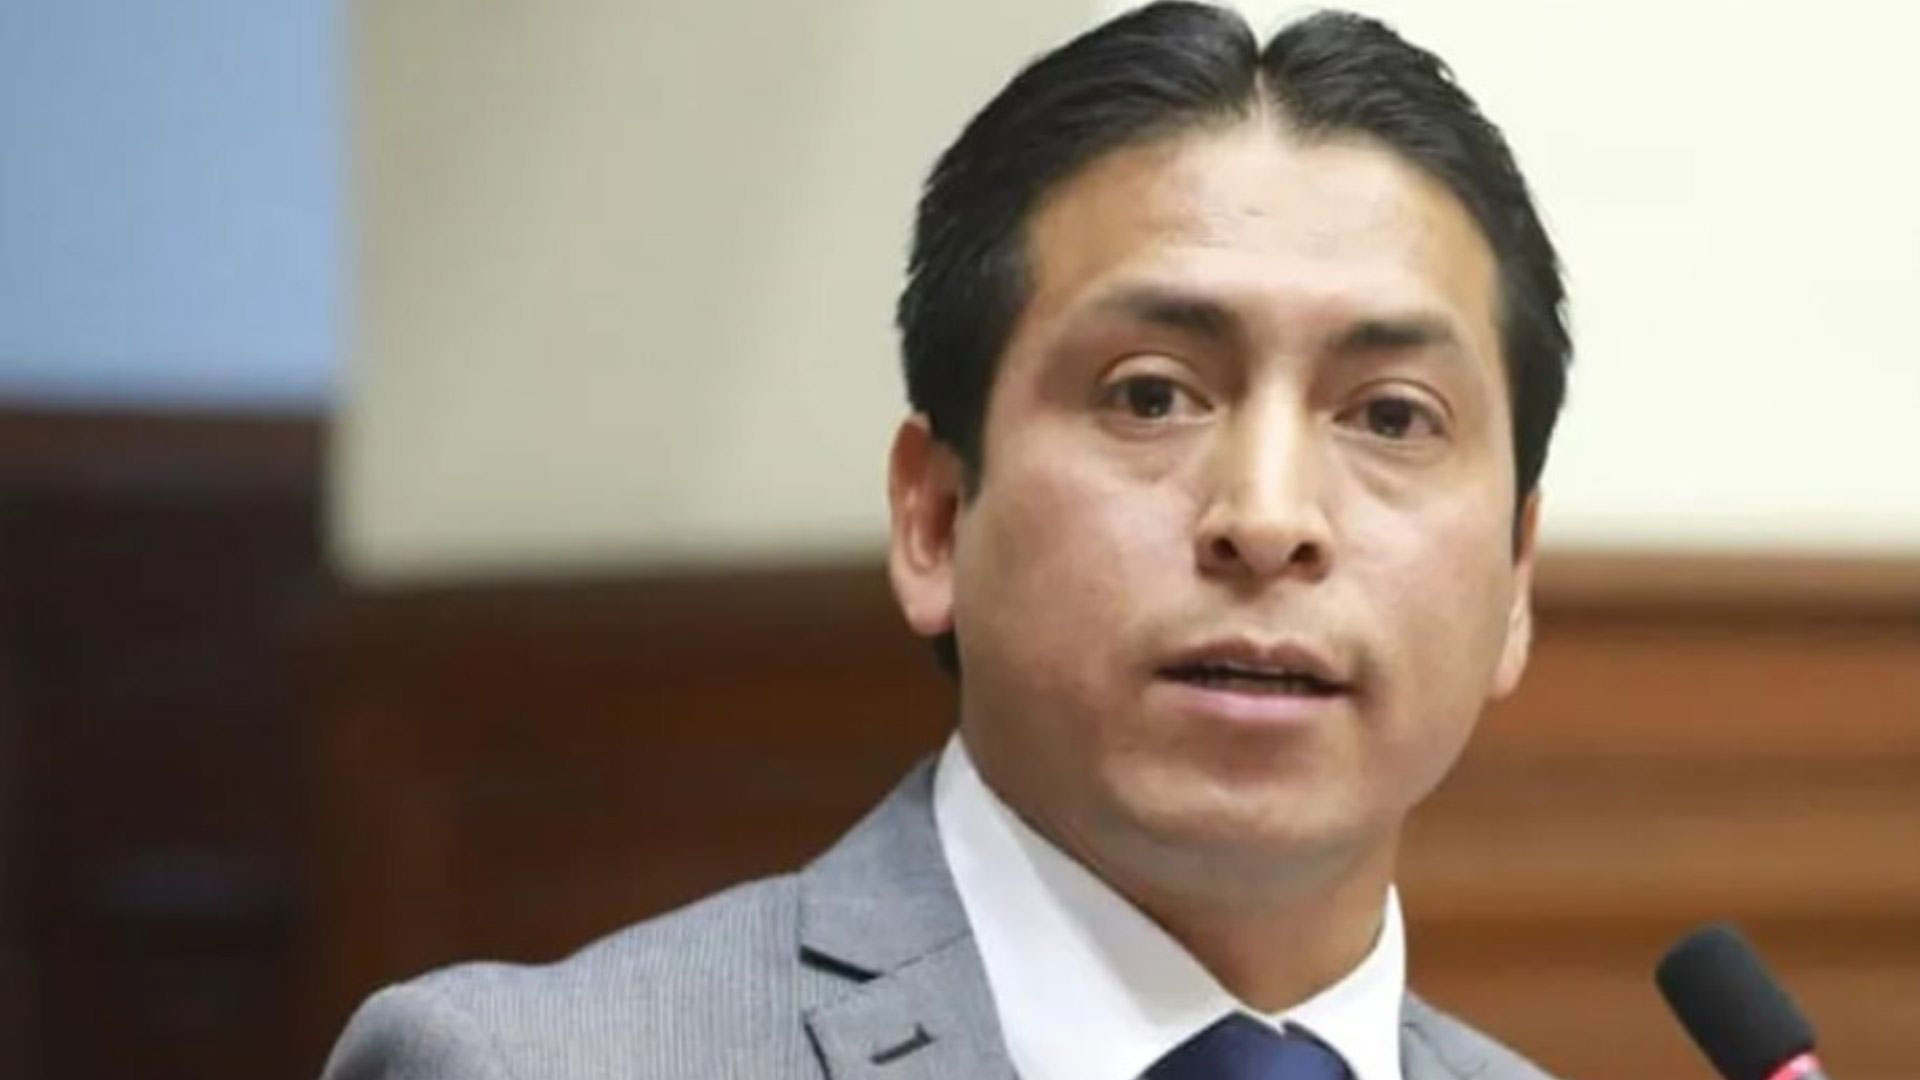 The disqualification of Freddy Díaz was achieved with a reconsideration of the vote.